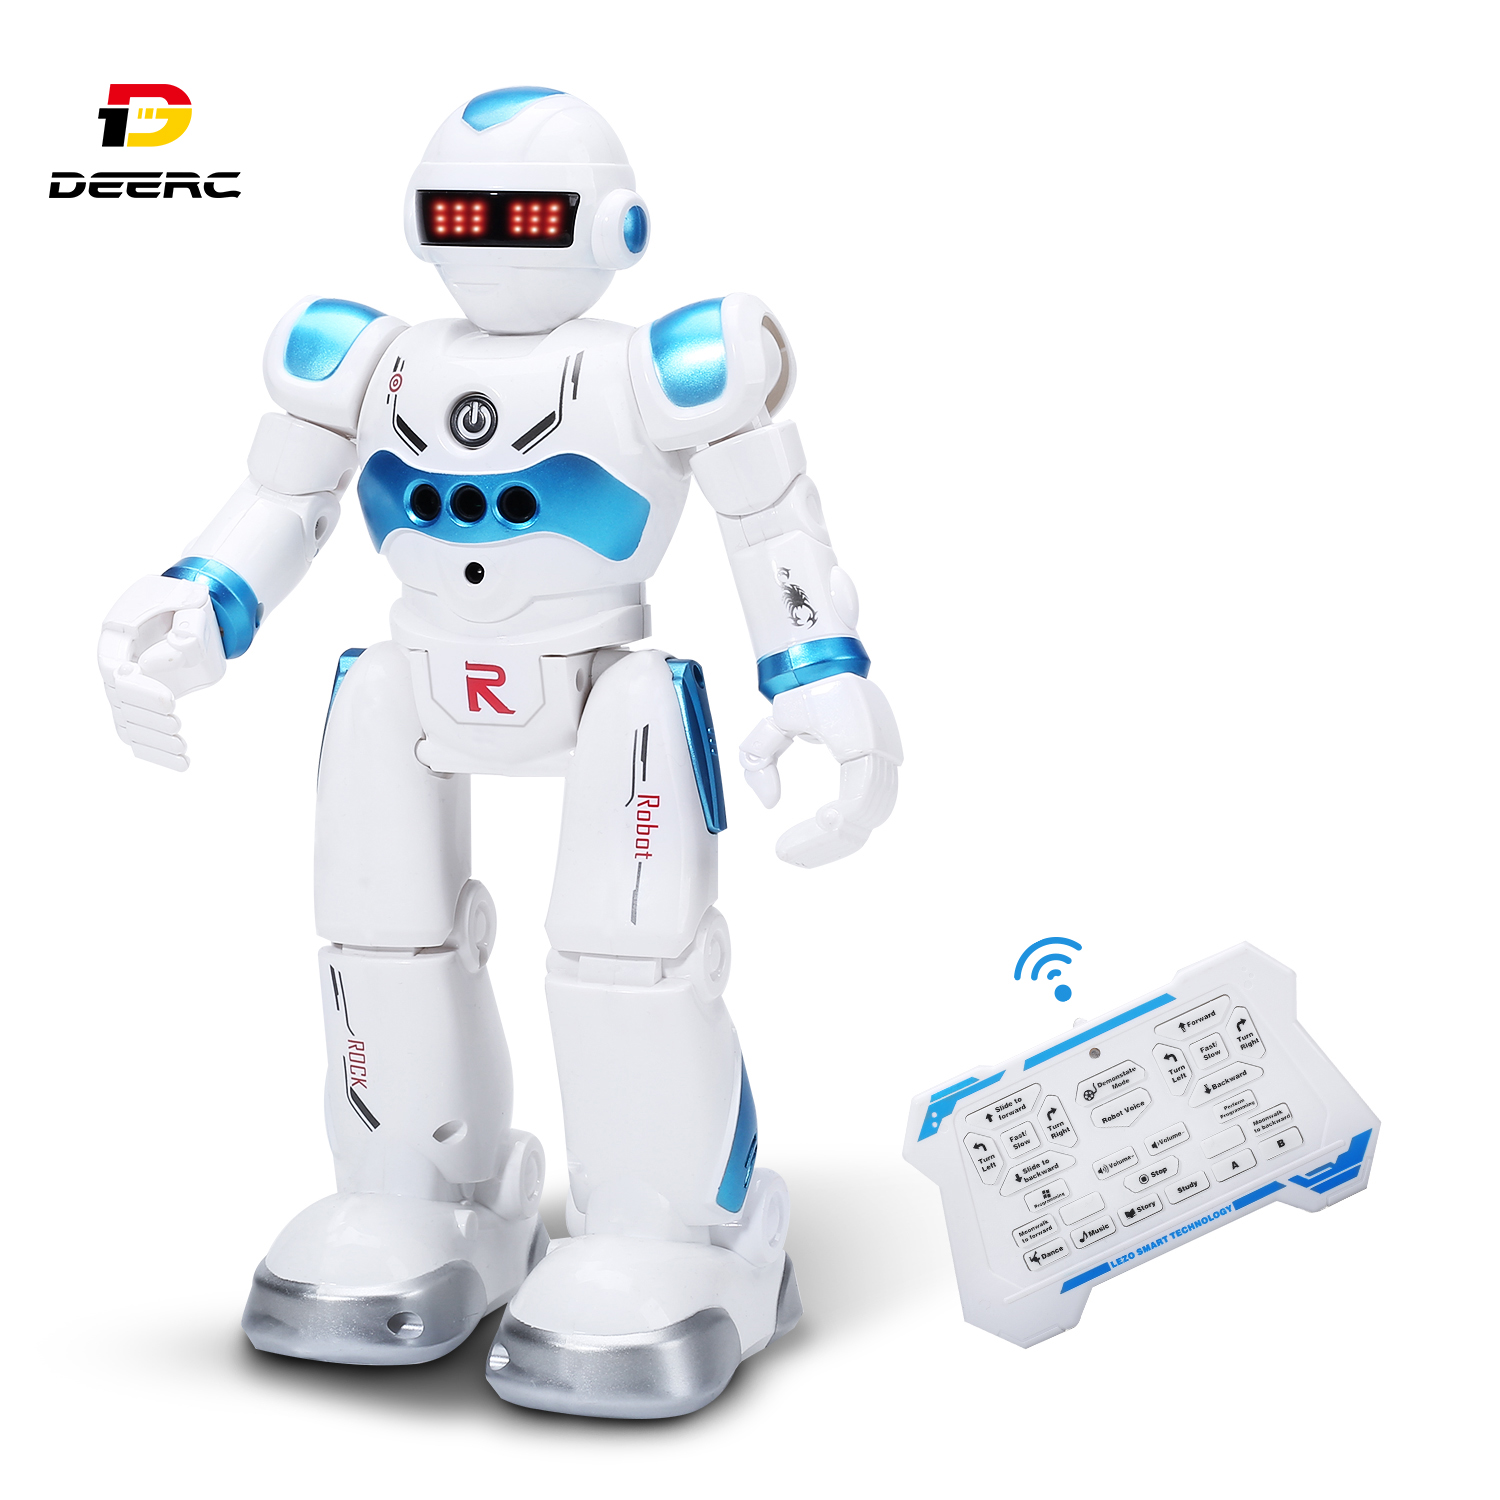 DEERC Robot Toys for Kids Boys Smart Programmable Remote Control Robots with Toy 